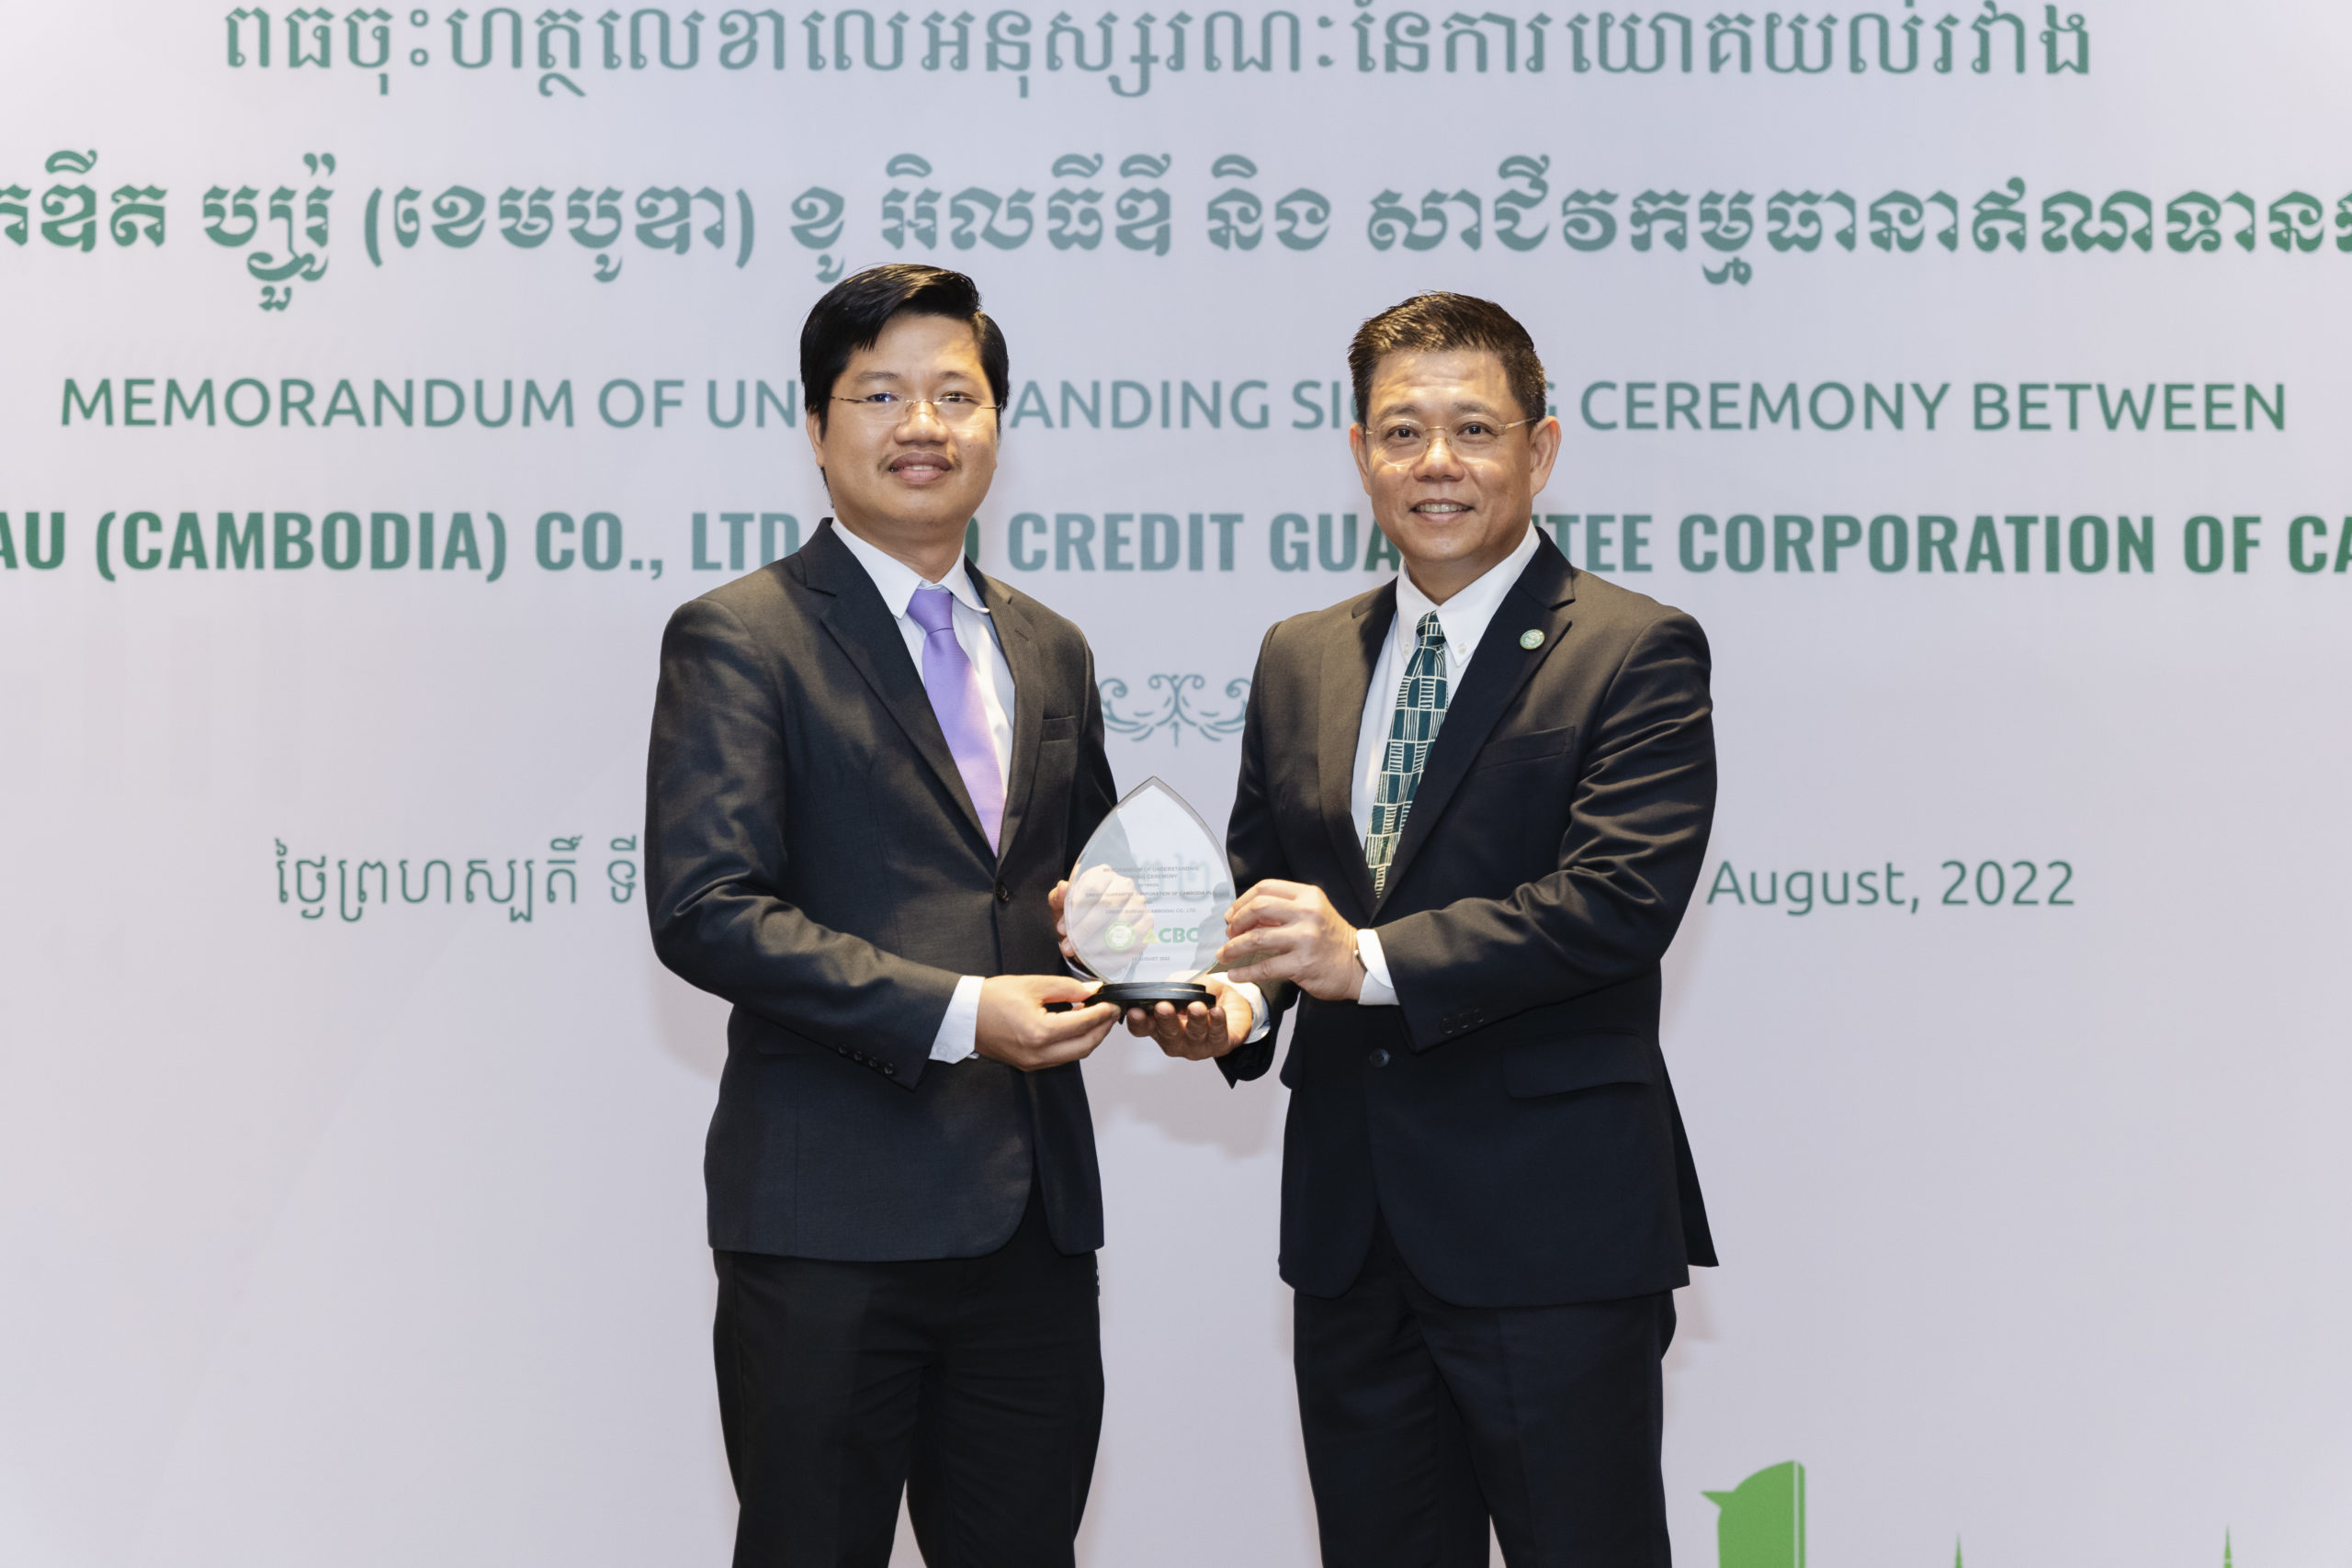 CGCC and Credit Bureau partnership to promote SME and women’s access to finance